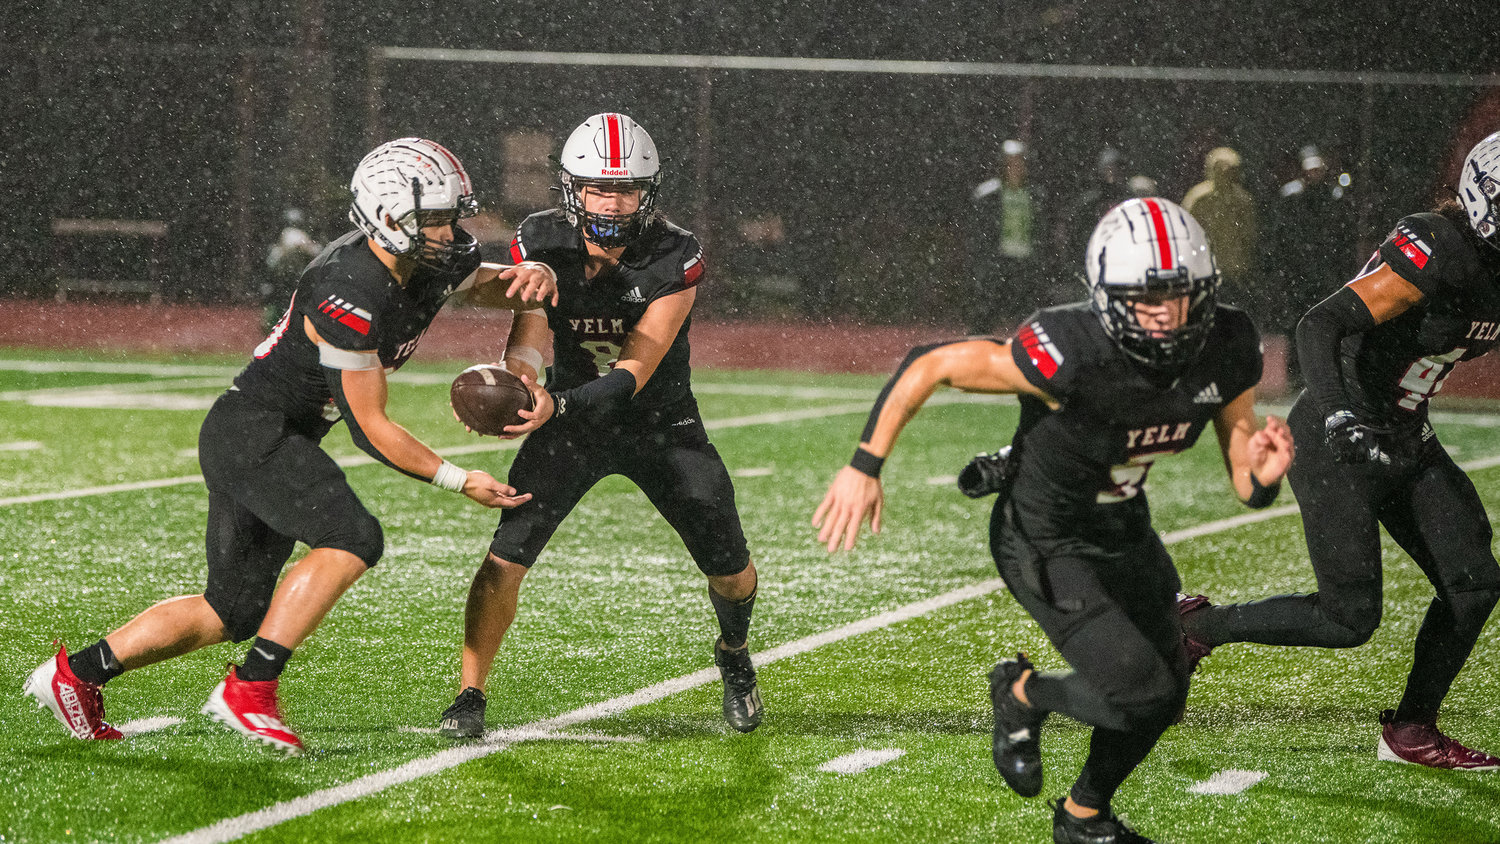 Yelm junior Damian Aalona (8) makes a handoff during a game against the Bishop Blanchet Bears.